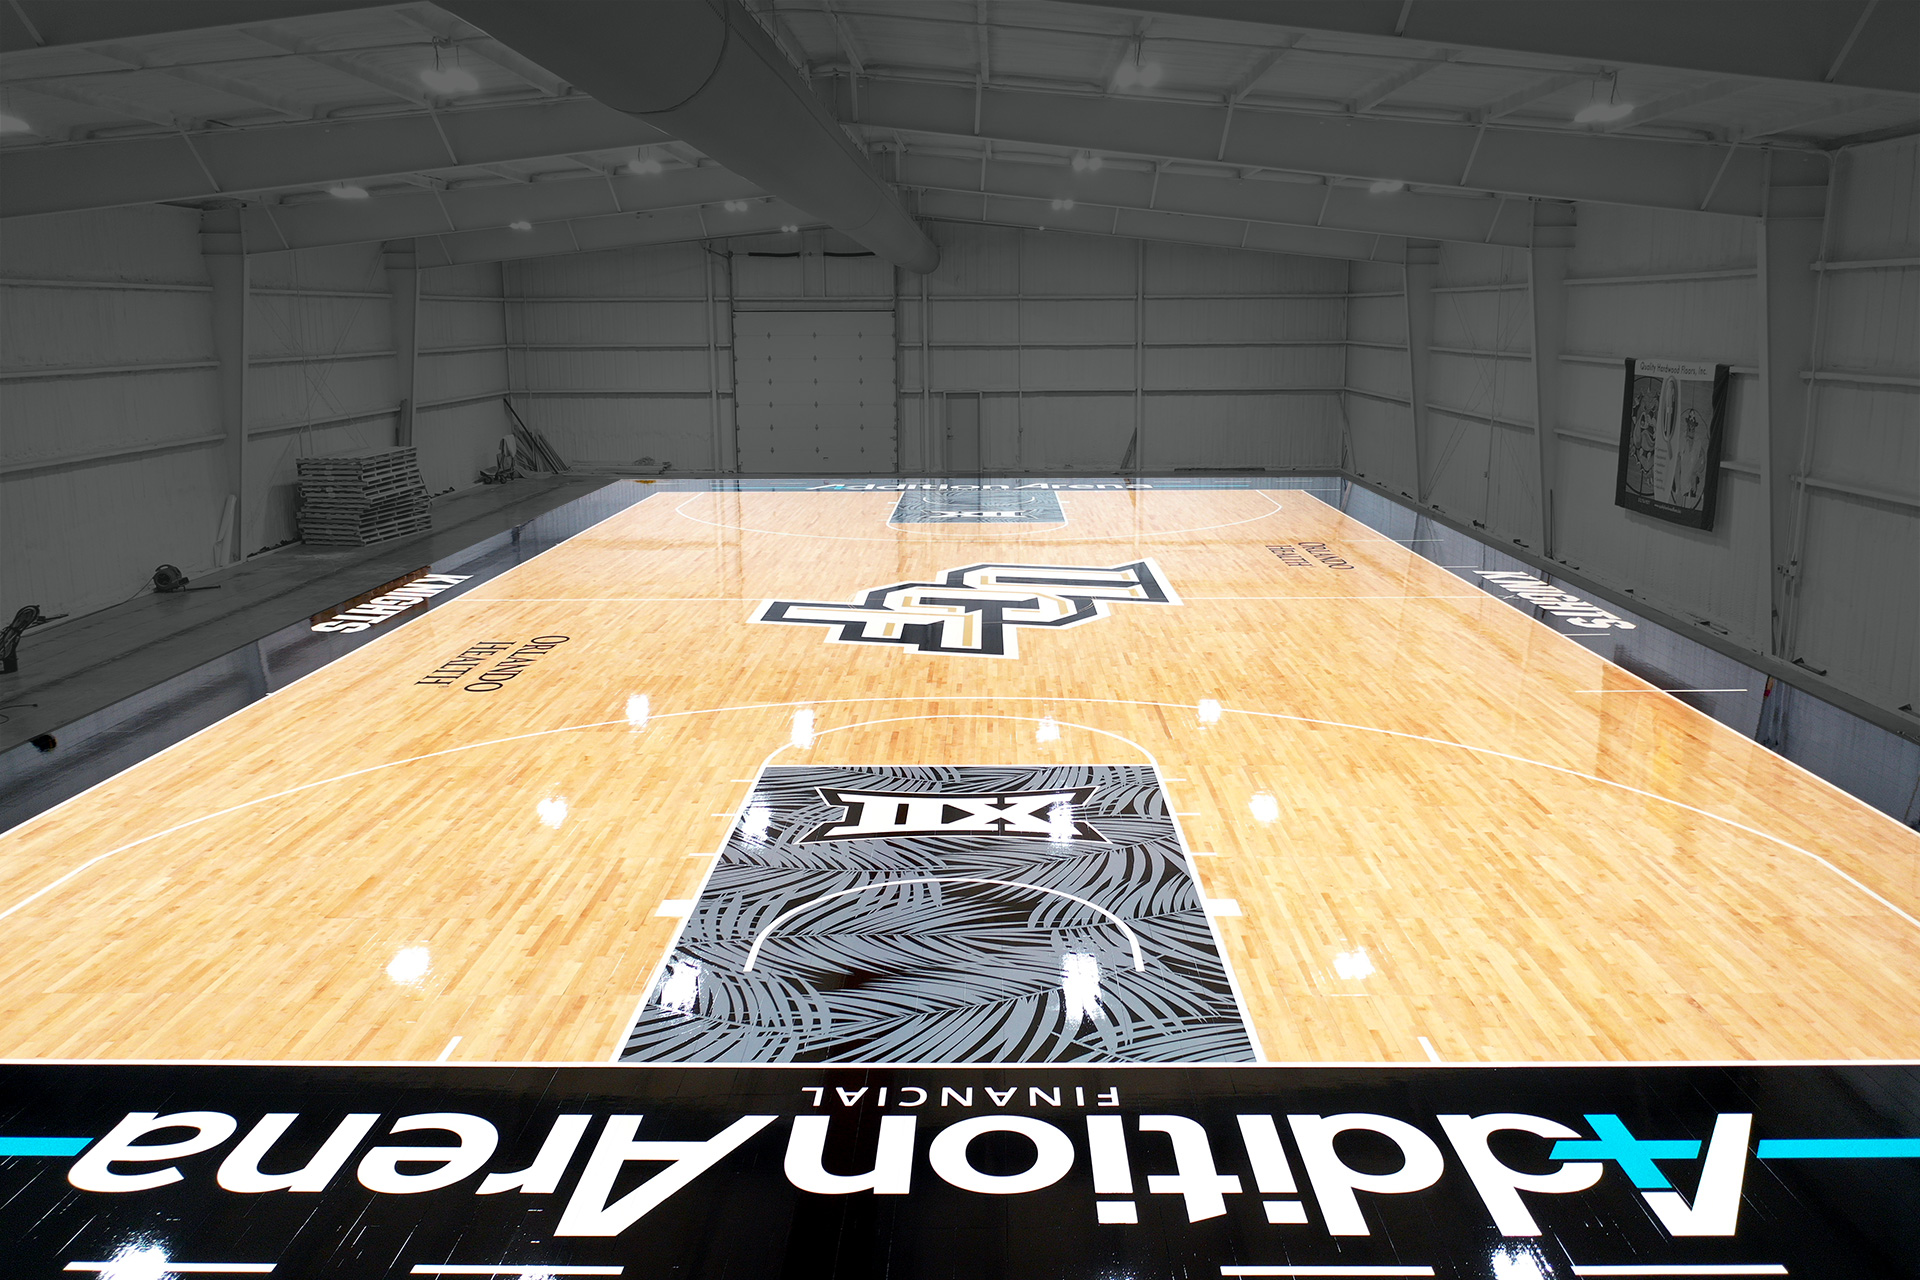 University of Central Florida portable floor. Down-court view.